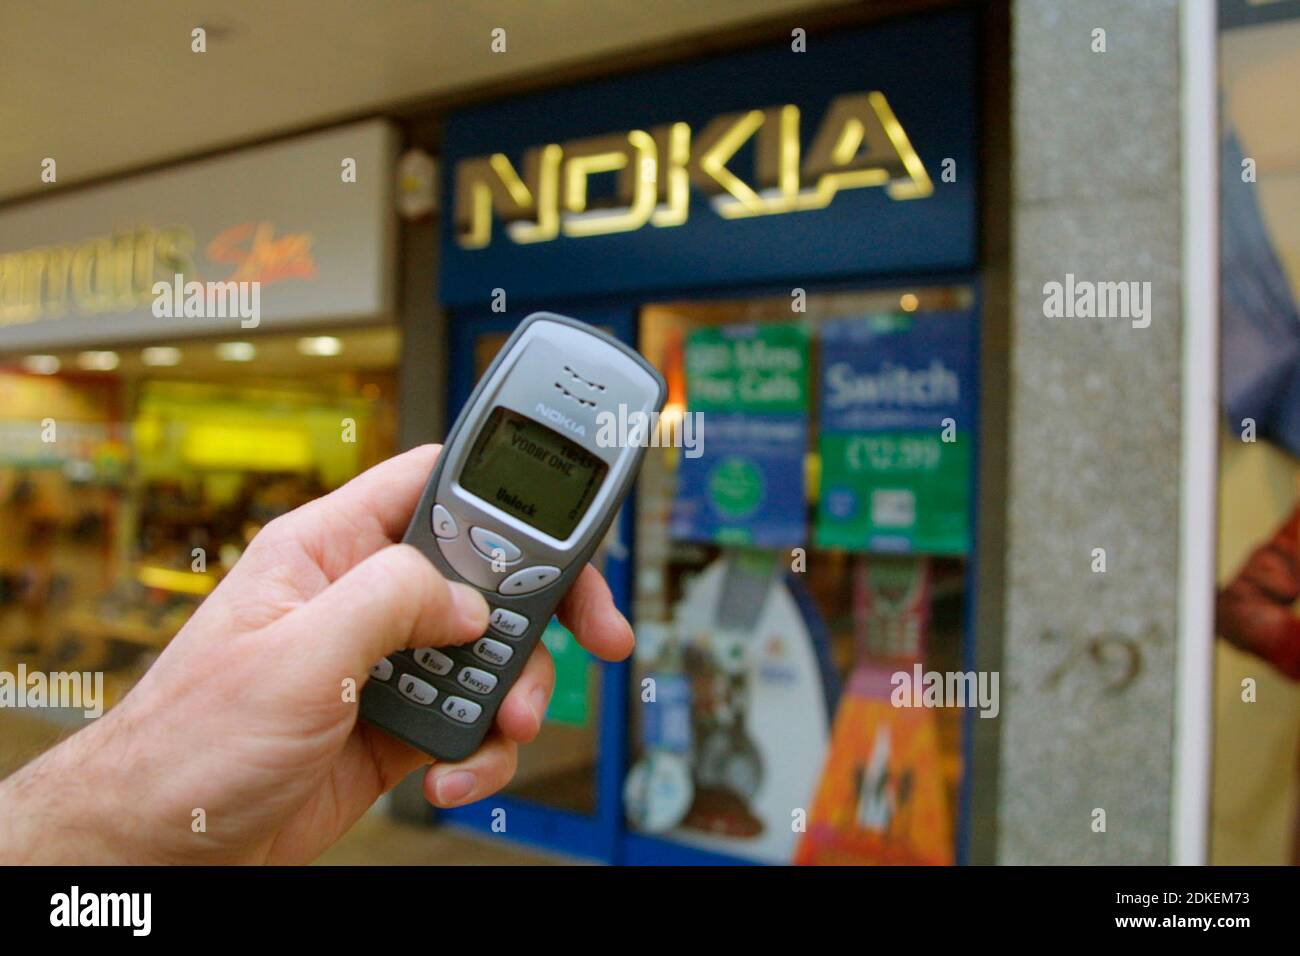 A hand holding a Nokia 3210 mobile phone in front of a Nokia shop, in Edinburgh, Scotland. This was a highly popular cellular phone released in 1999. Stock Photo